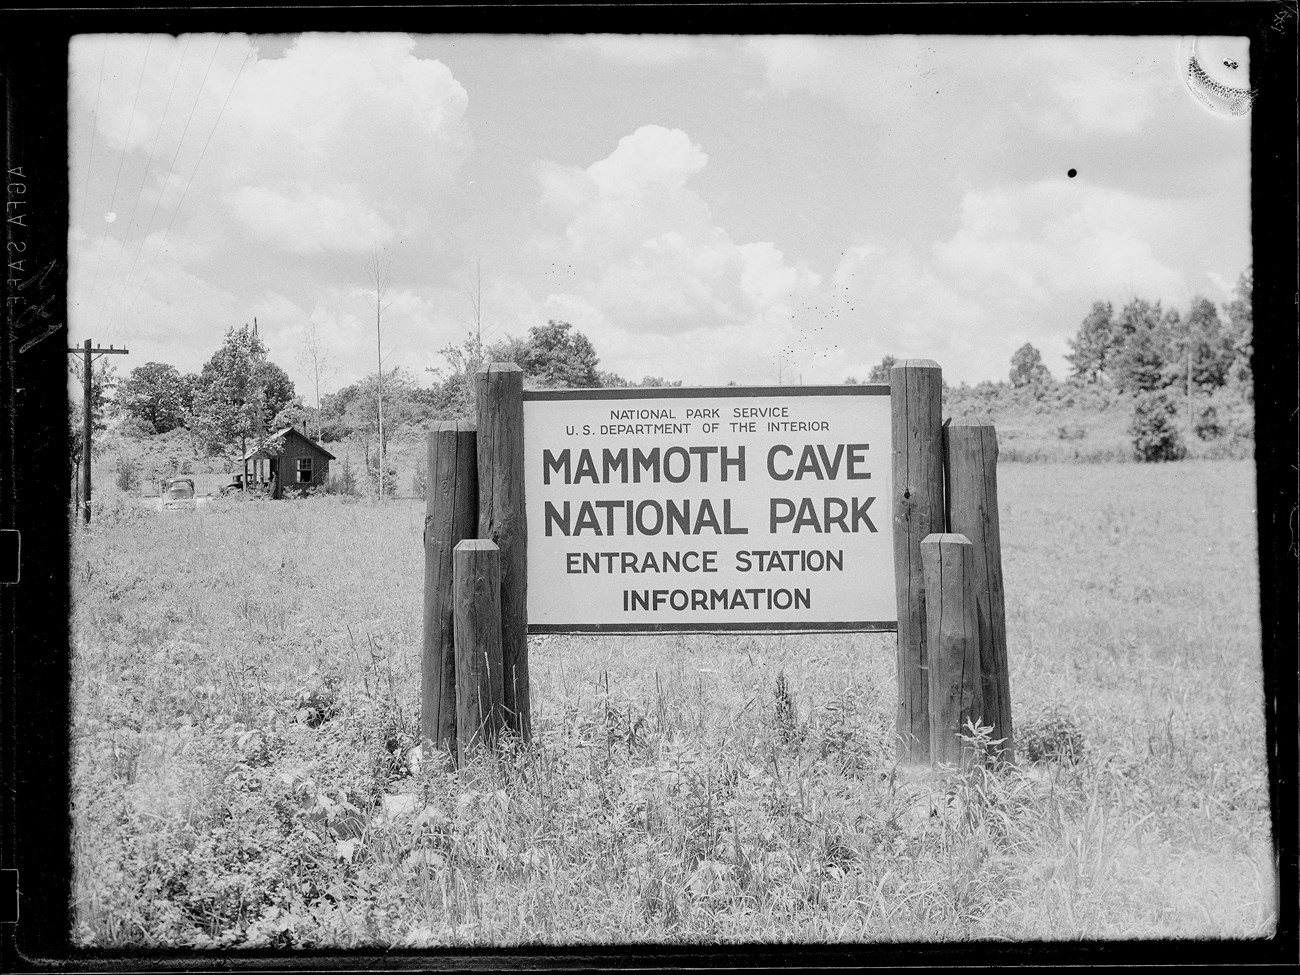 A sign on wooden posts says "Mammoth Cave National Park Entrance Station Information"